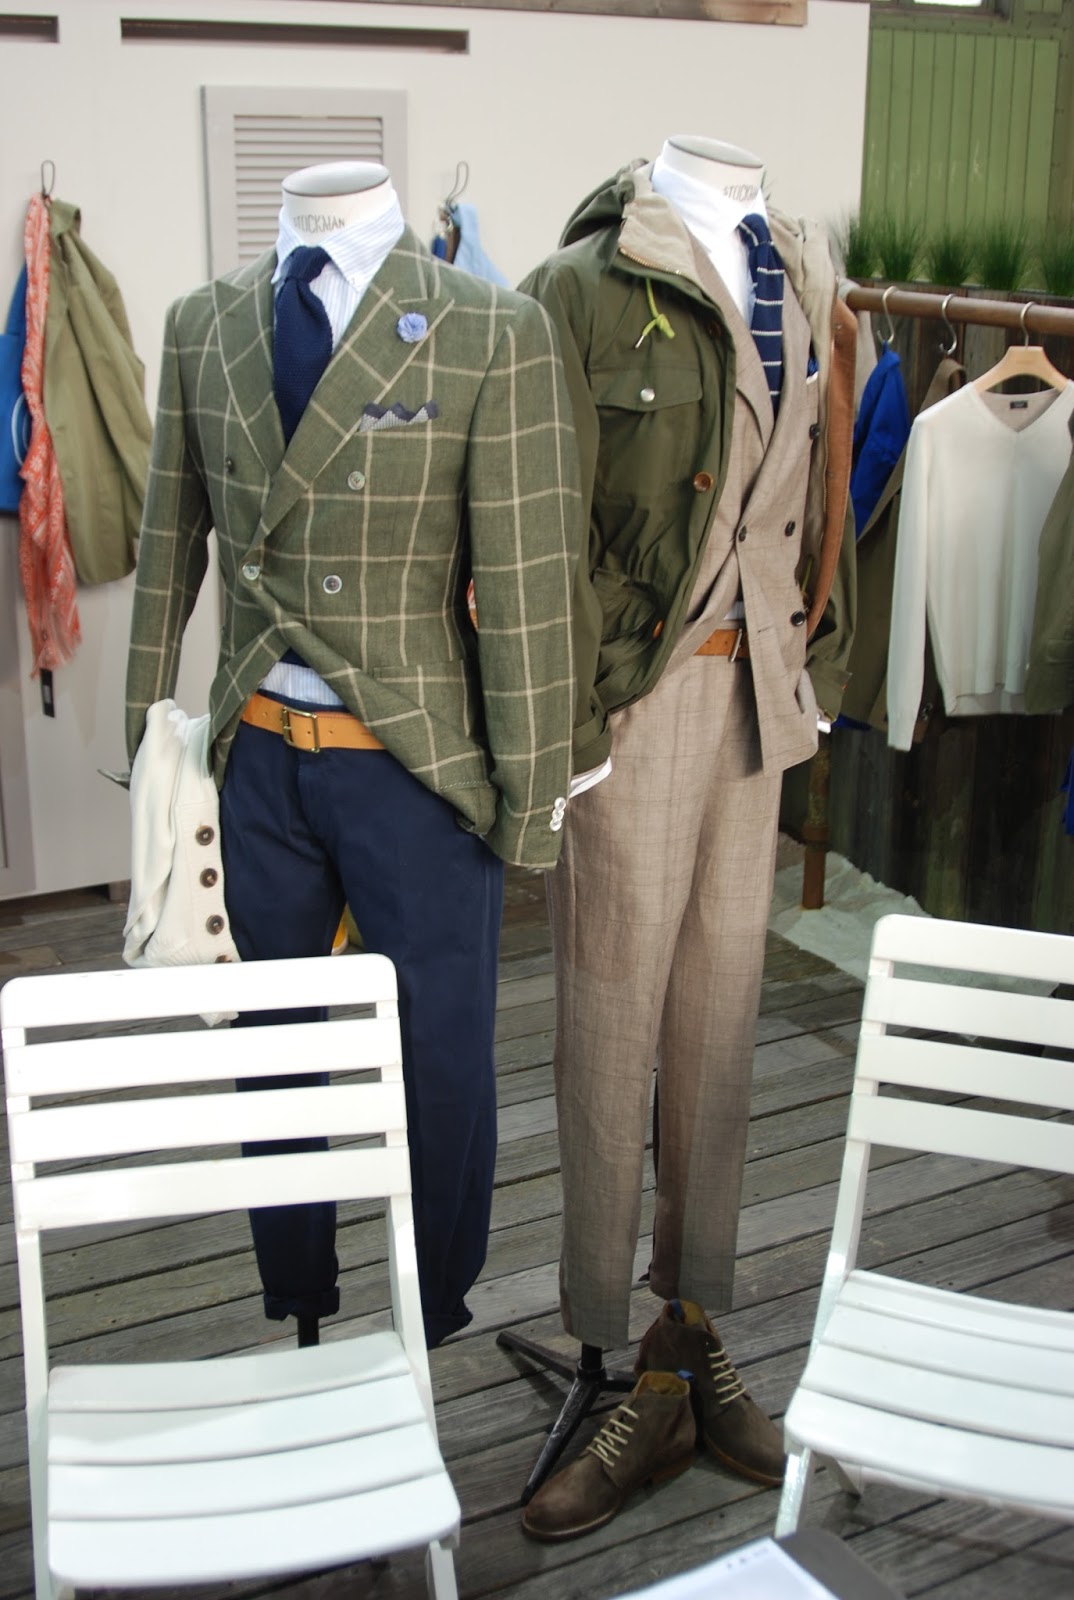 CHAD'S DRYGOODS: THE WINDSOR HAS THE SUMMER BLUES